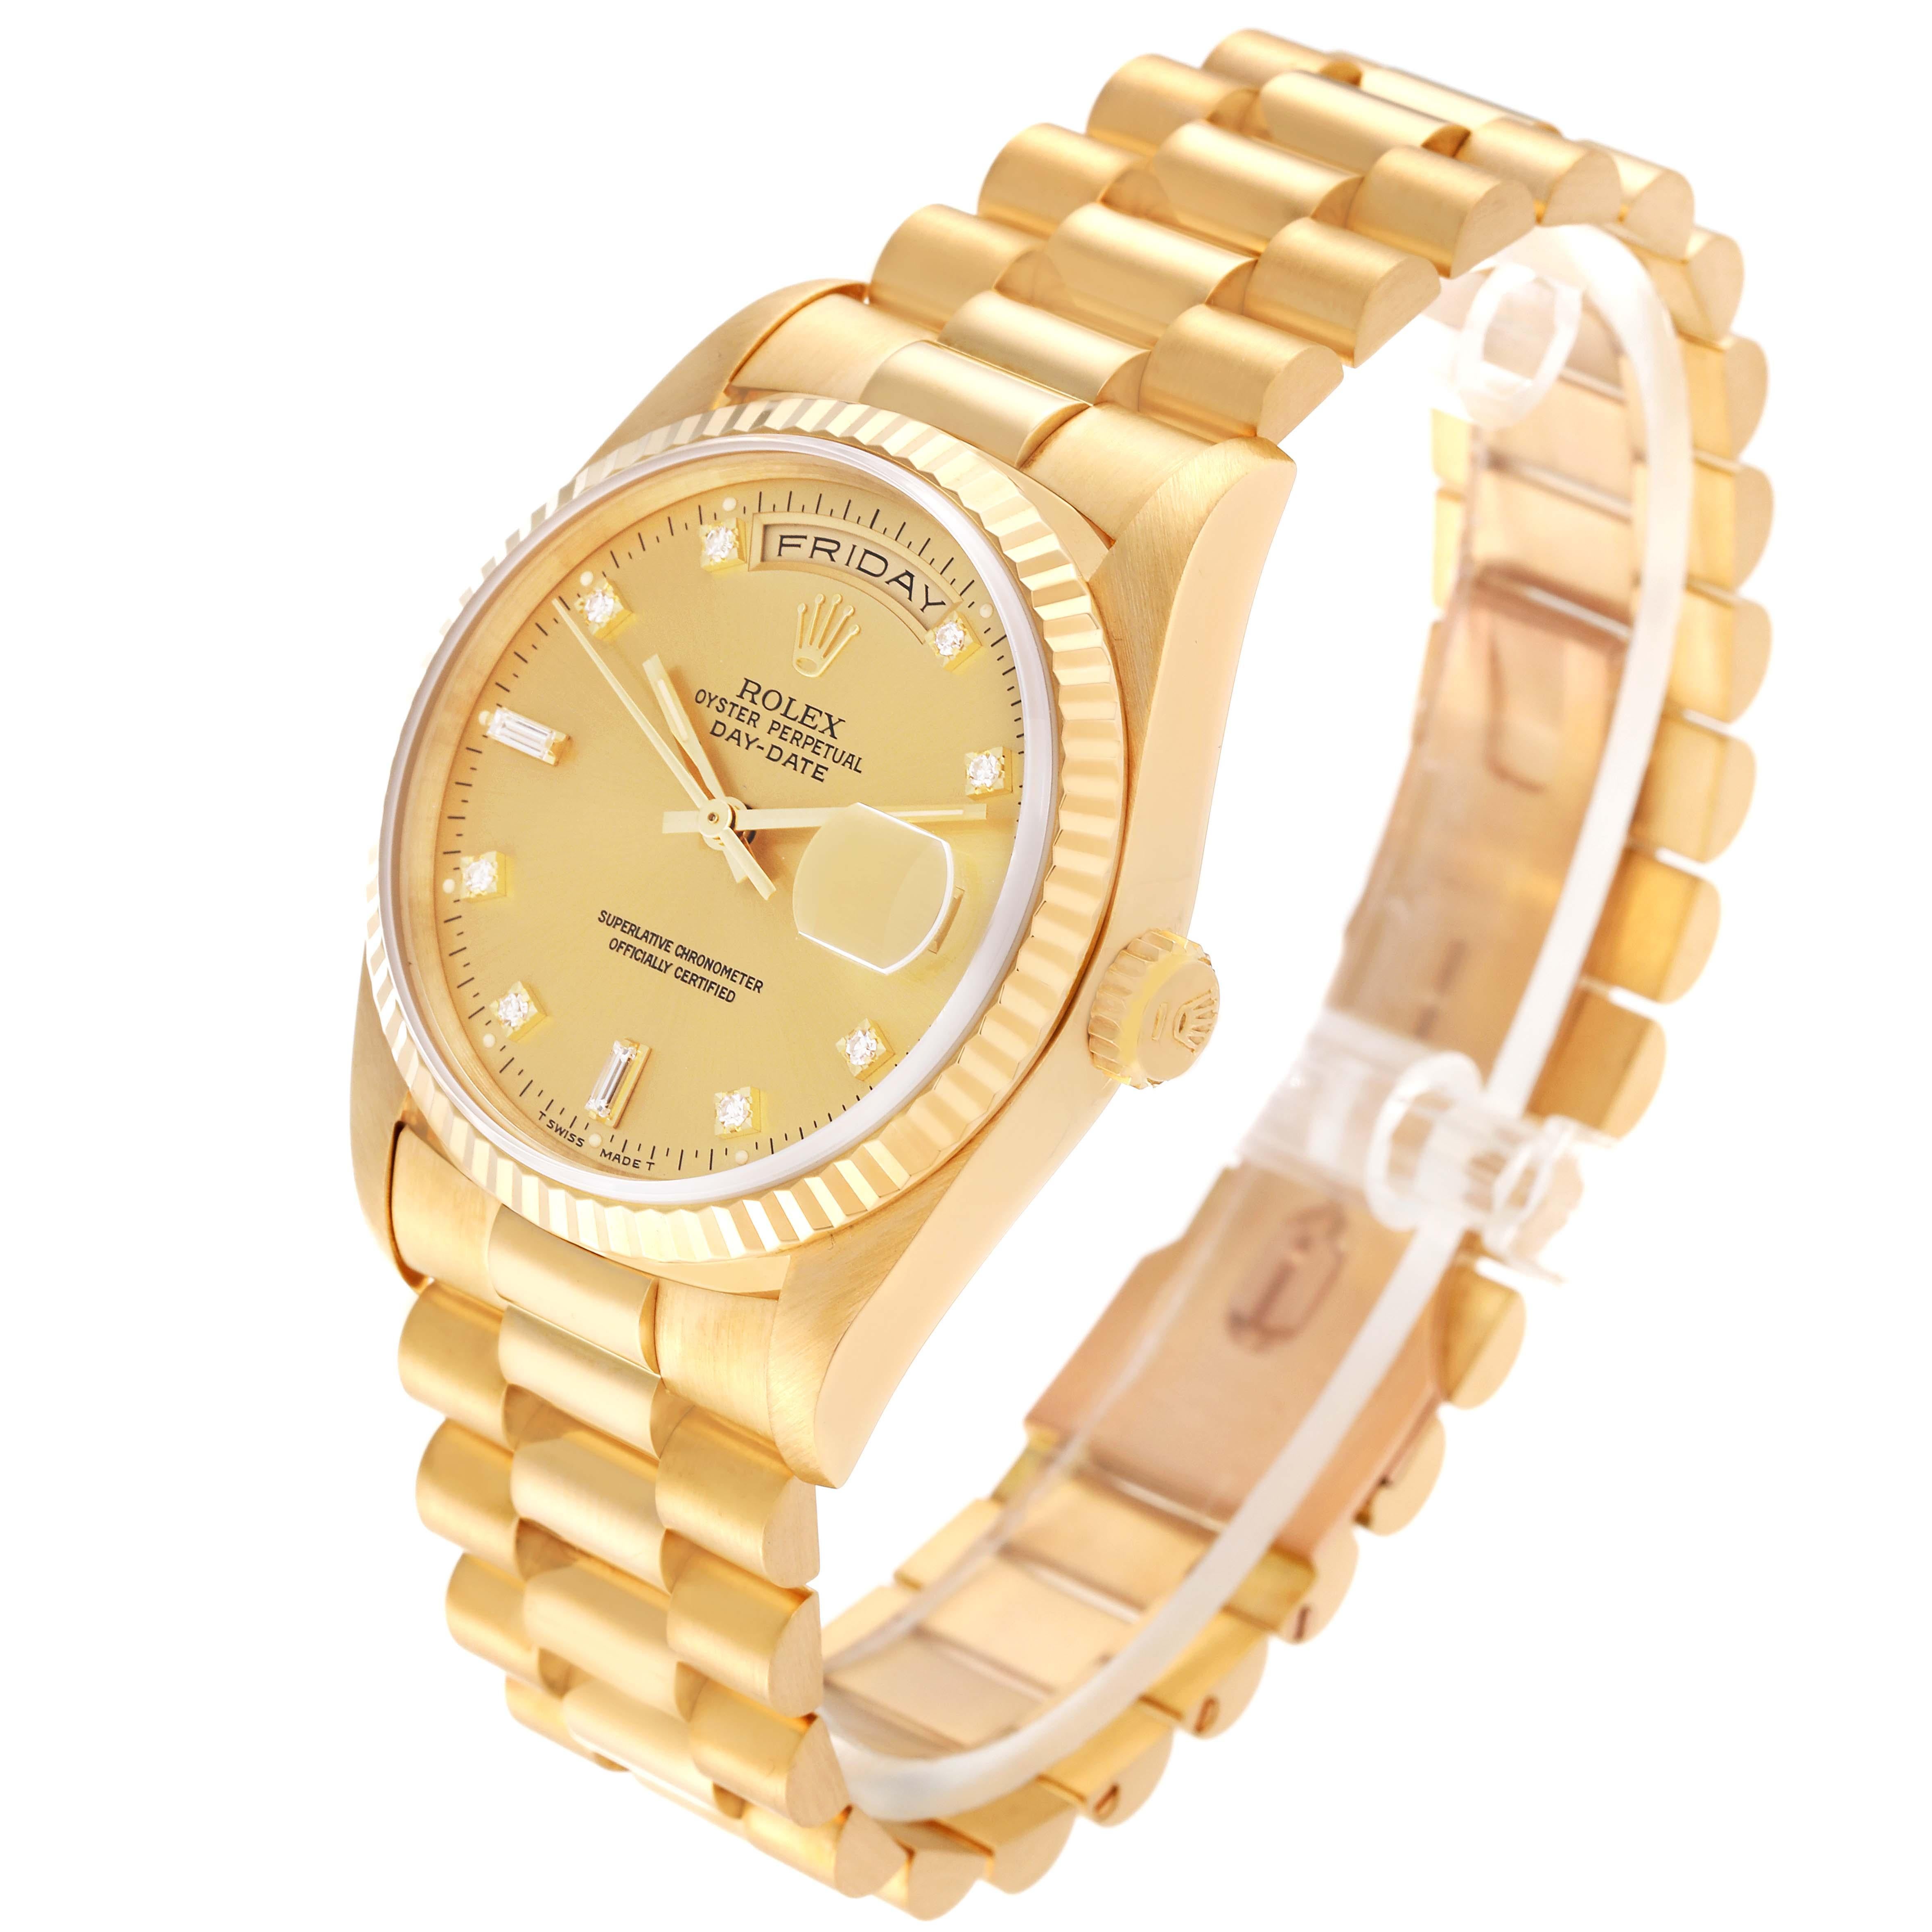 Rolex President Day-Date Yellow Gold Champagne Diamond Dial Mens Watch 18238 For Sale 6